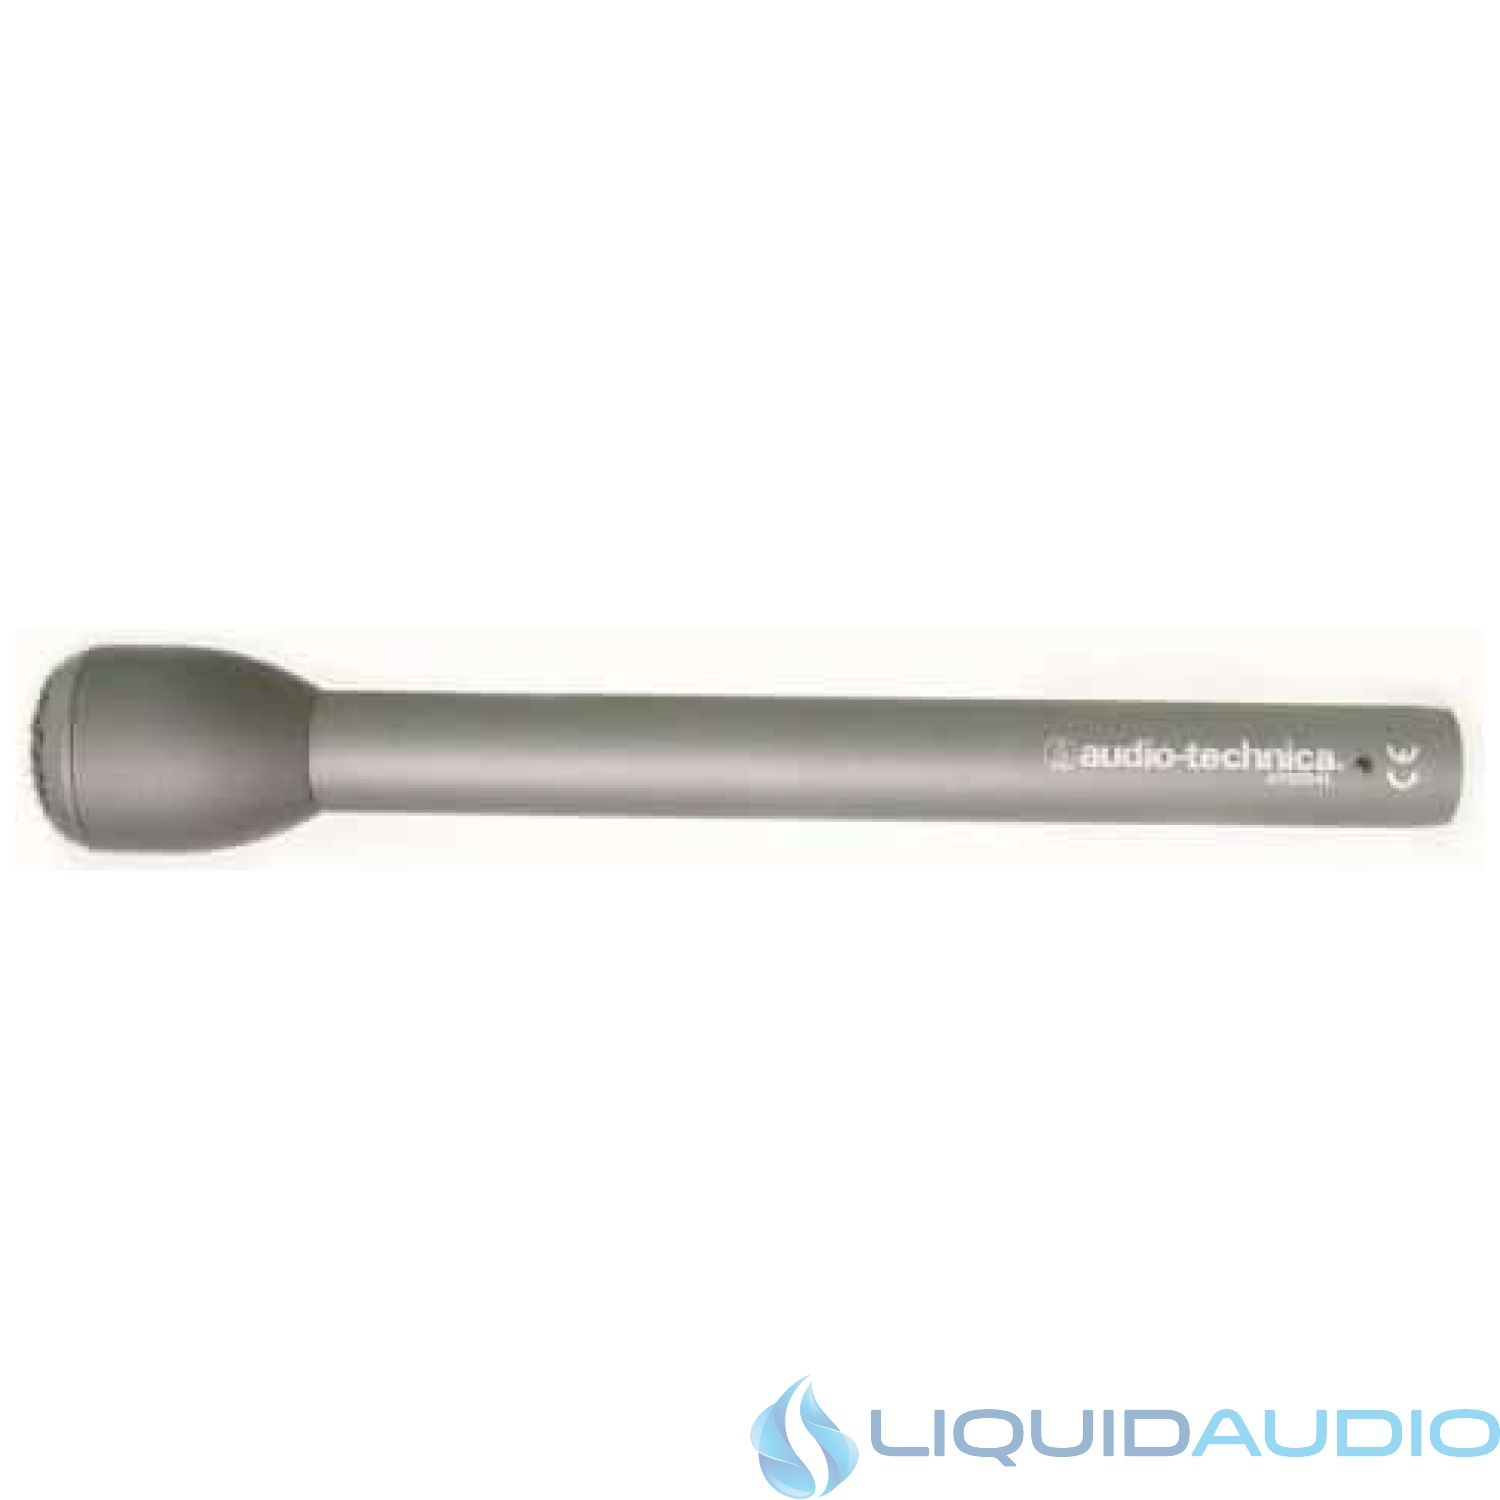 Audio-Technica AT8004L Handheld Omnidirectional Dynamic Microphone (Long Handle)